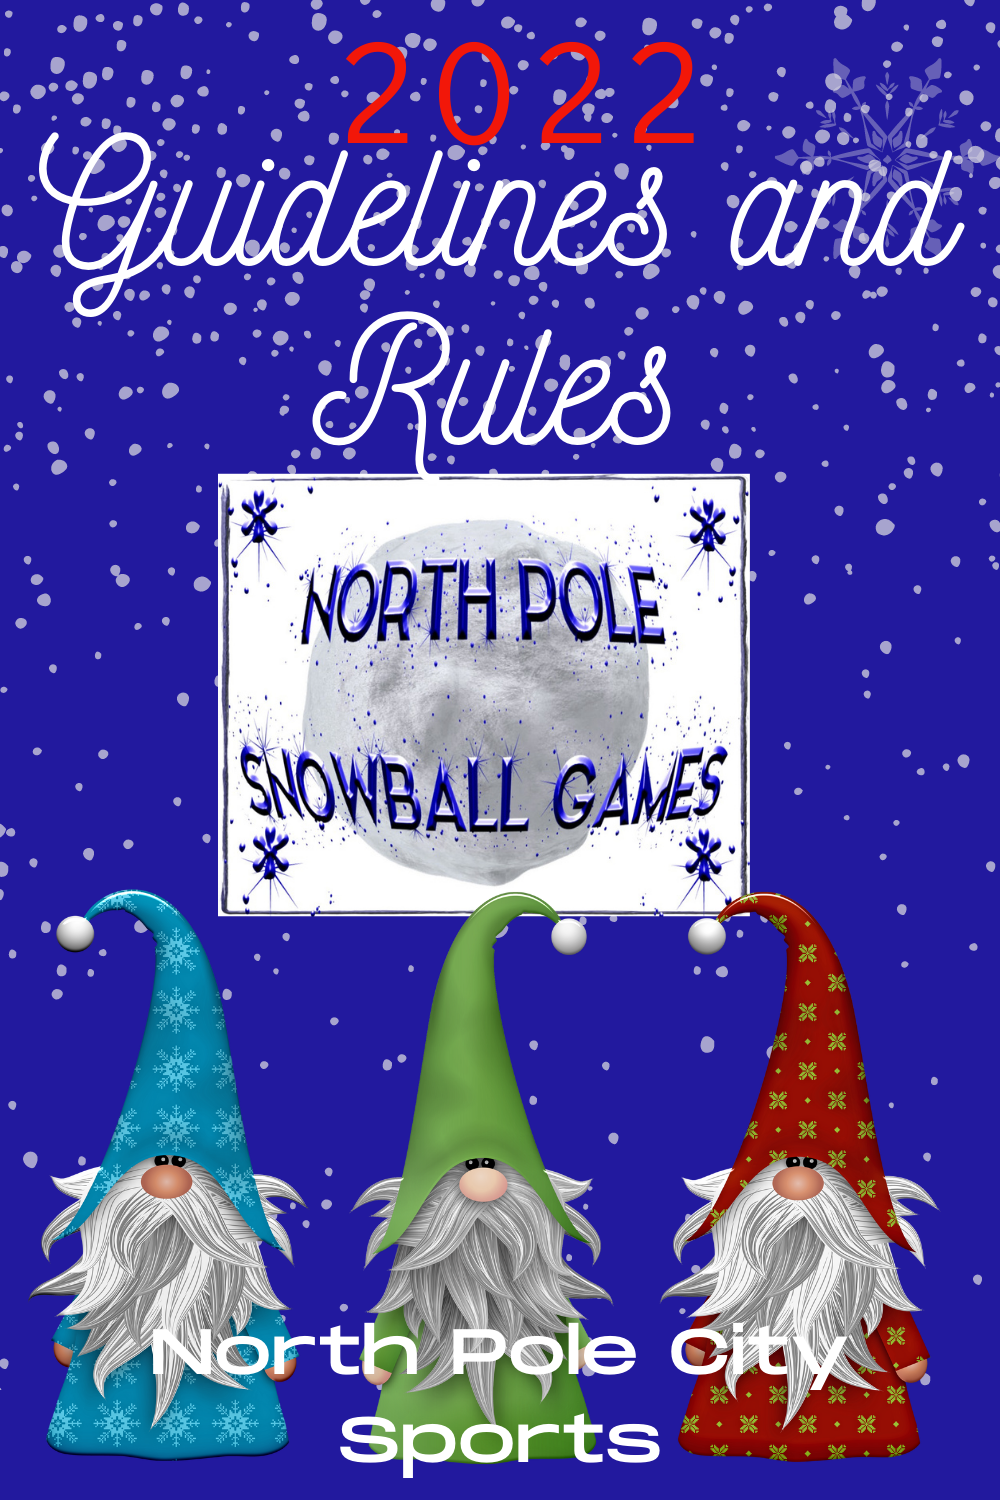 Snowball Games Rules and Guidelines Booklet Posted